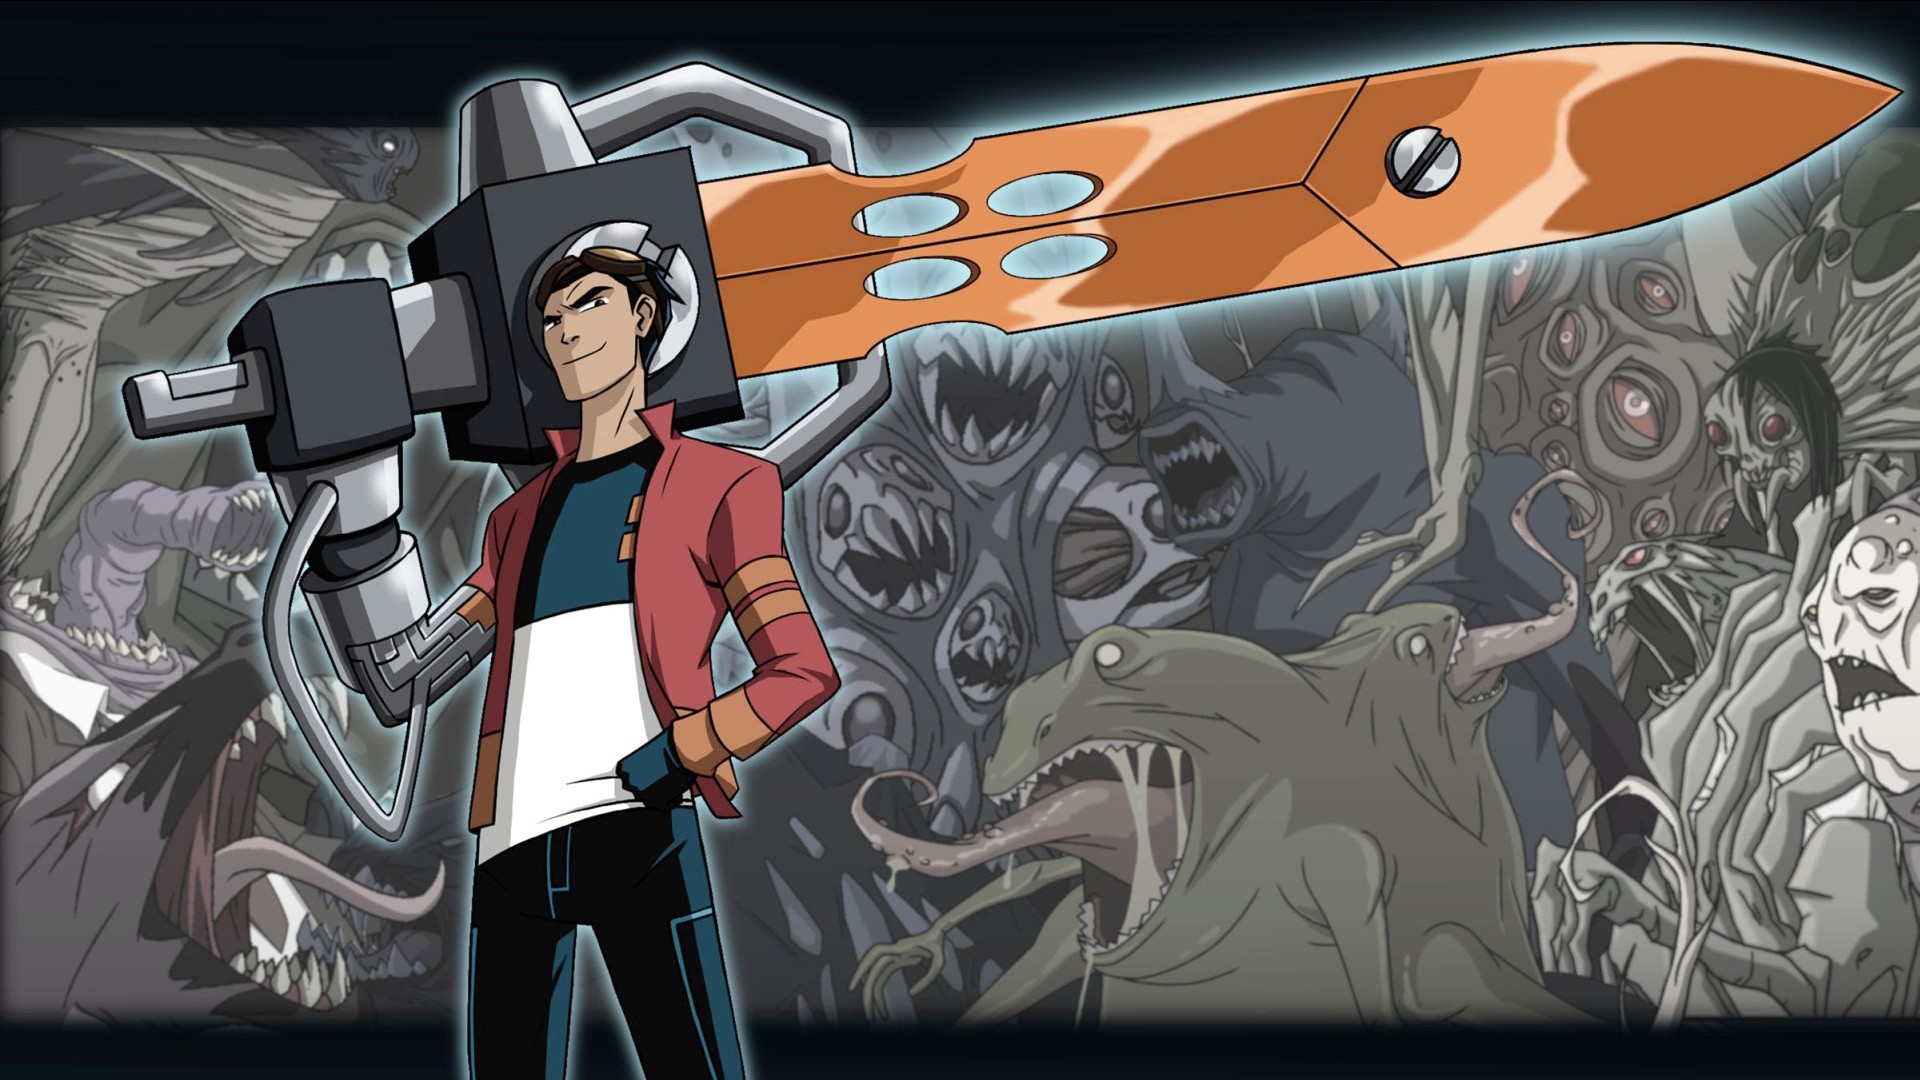 Generator Rex wallpapers and images - wallpapers, pictures, photos